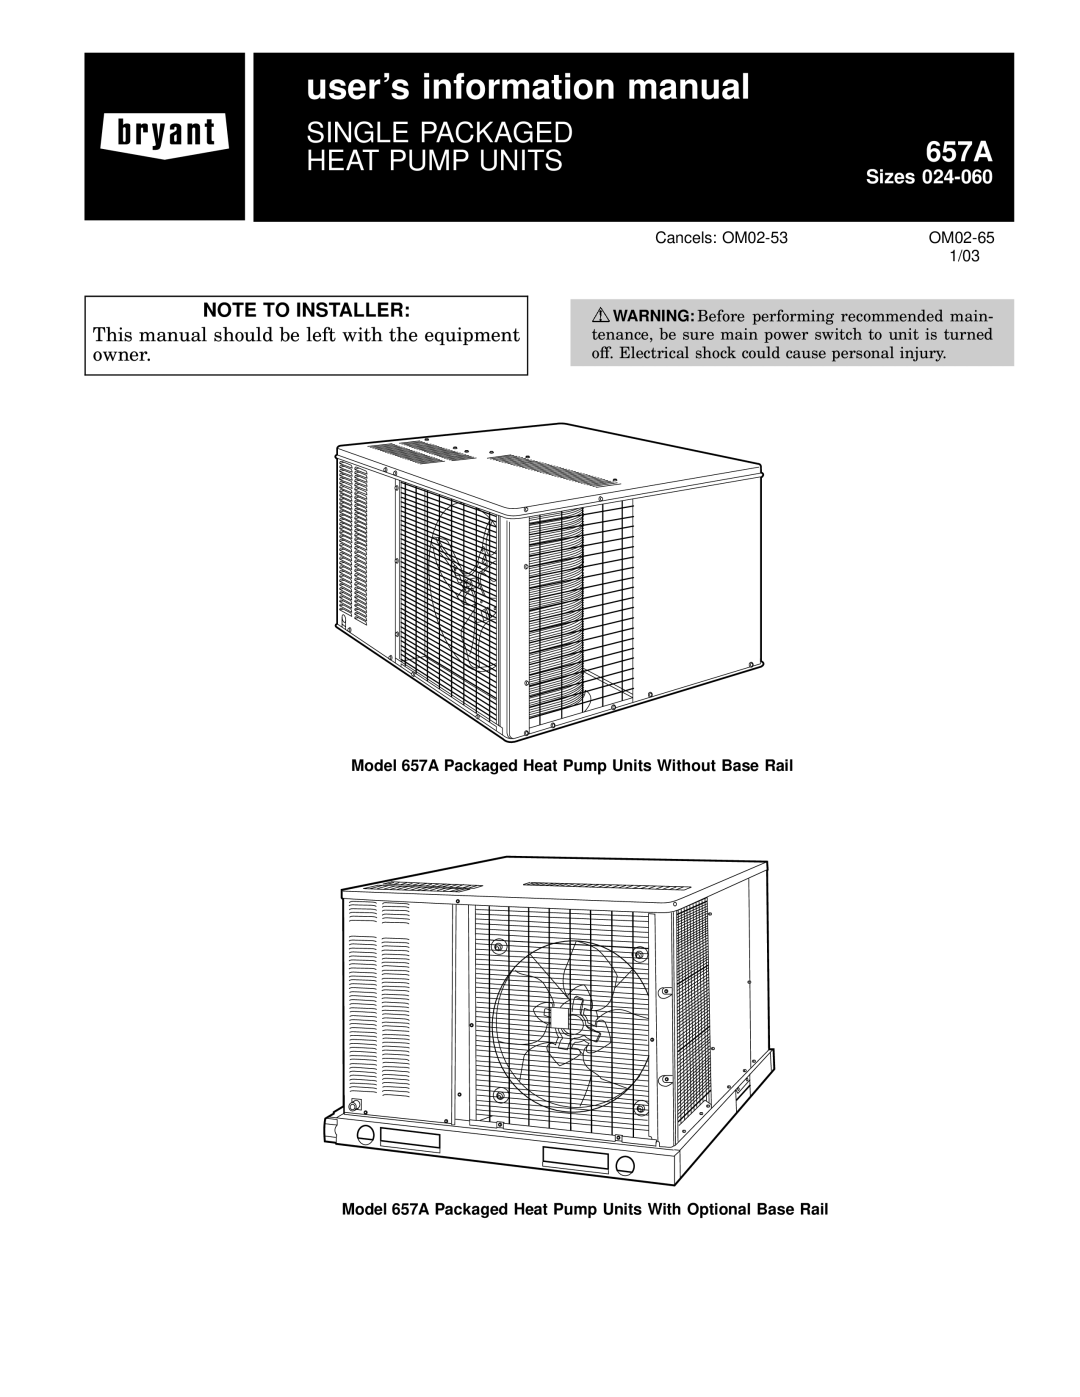 Bryant 657A manual users information manual, Single Packaged, Heat Pump Units, Sizes, Note To Installer 